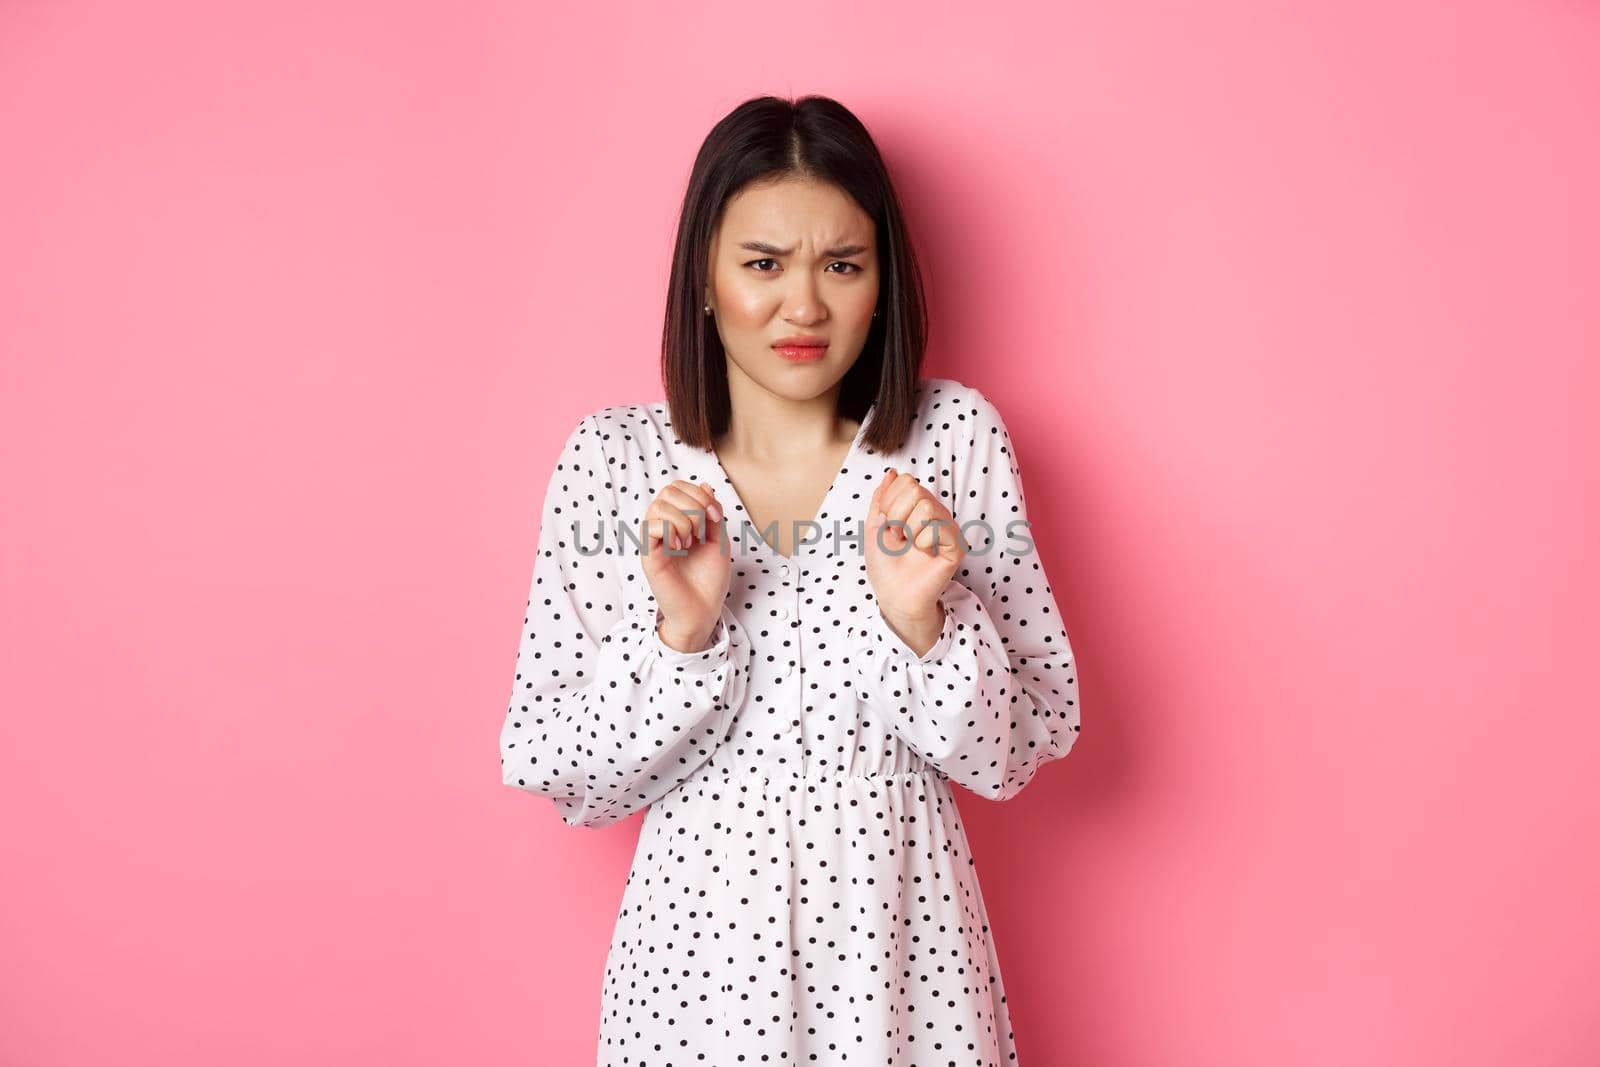 Disgusted asian woman staring with aversion and dislike, frowning and grimacing dissatisfied, standing in dress against pink background by Benzoix